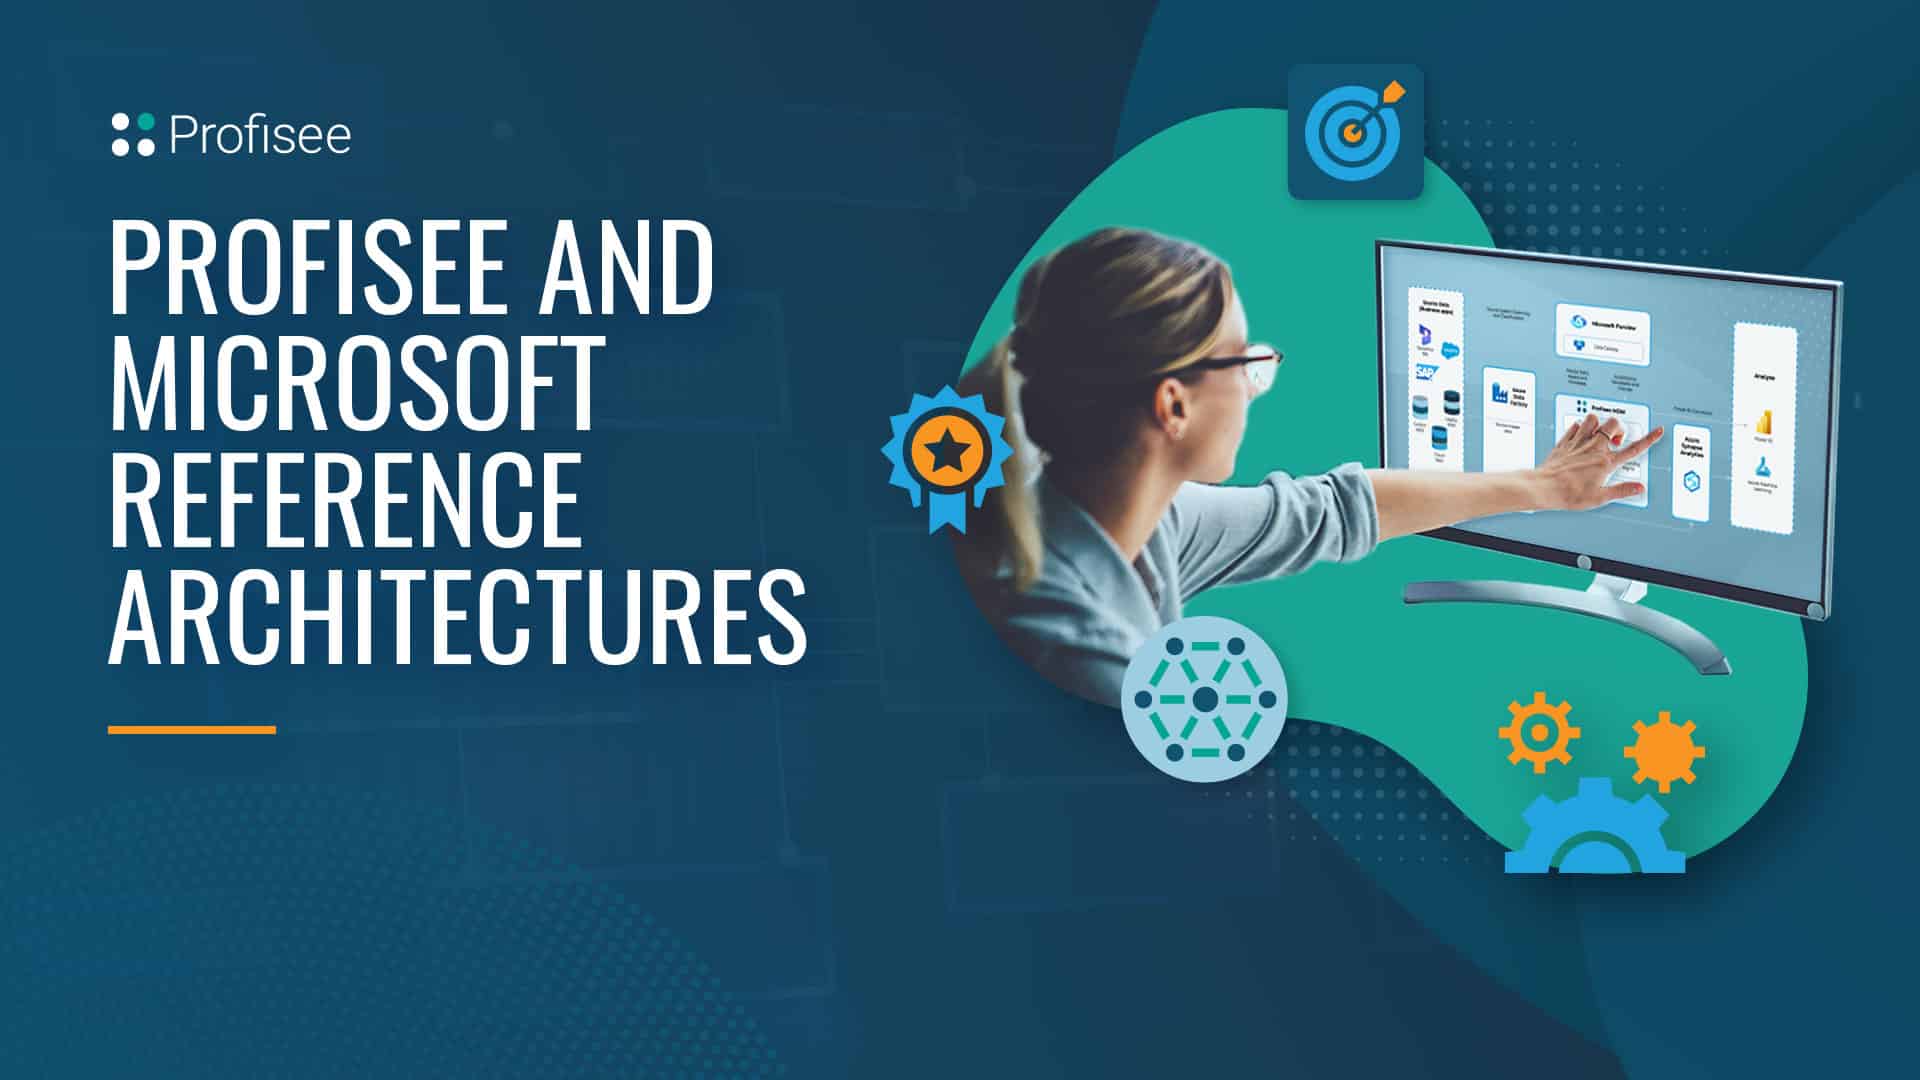 Featured image for Profisee and Microsoft Reference Architectures page